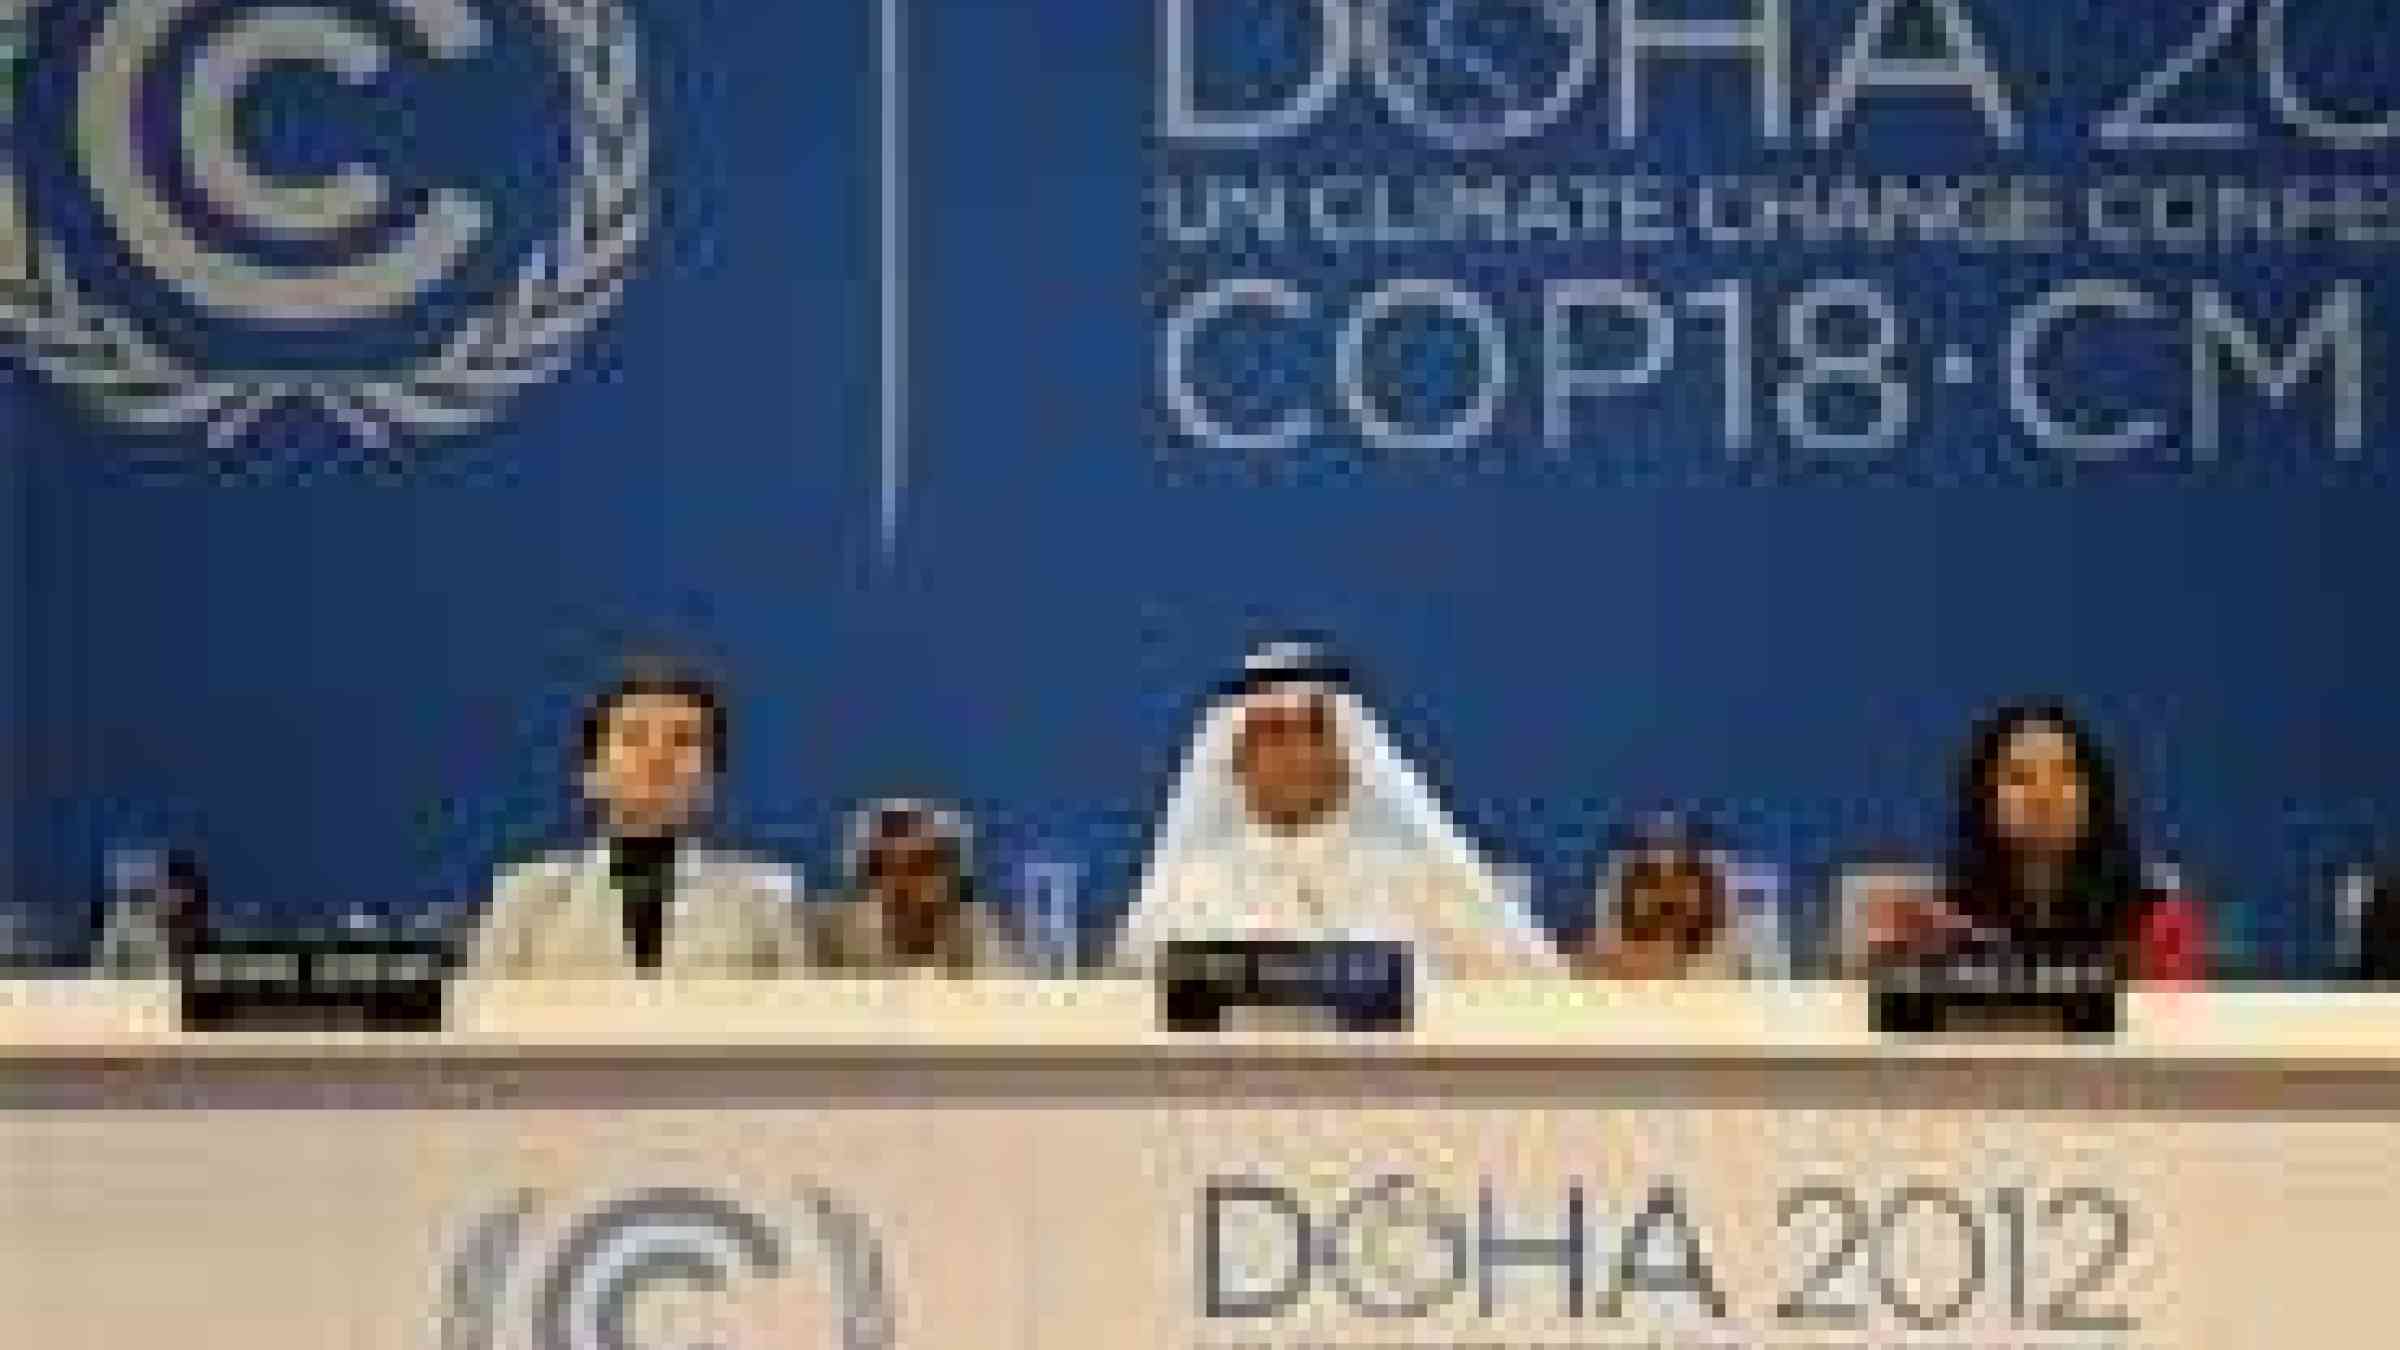 by UNFCCC http://www.rtcc.org/what-next-for-the-green-climate-fund-after-doha-dud/